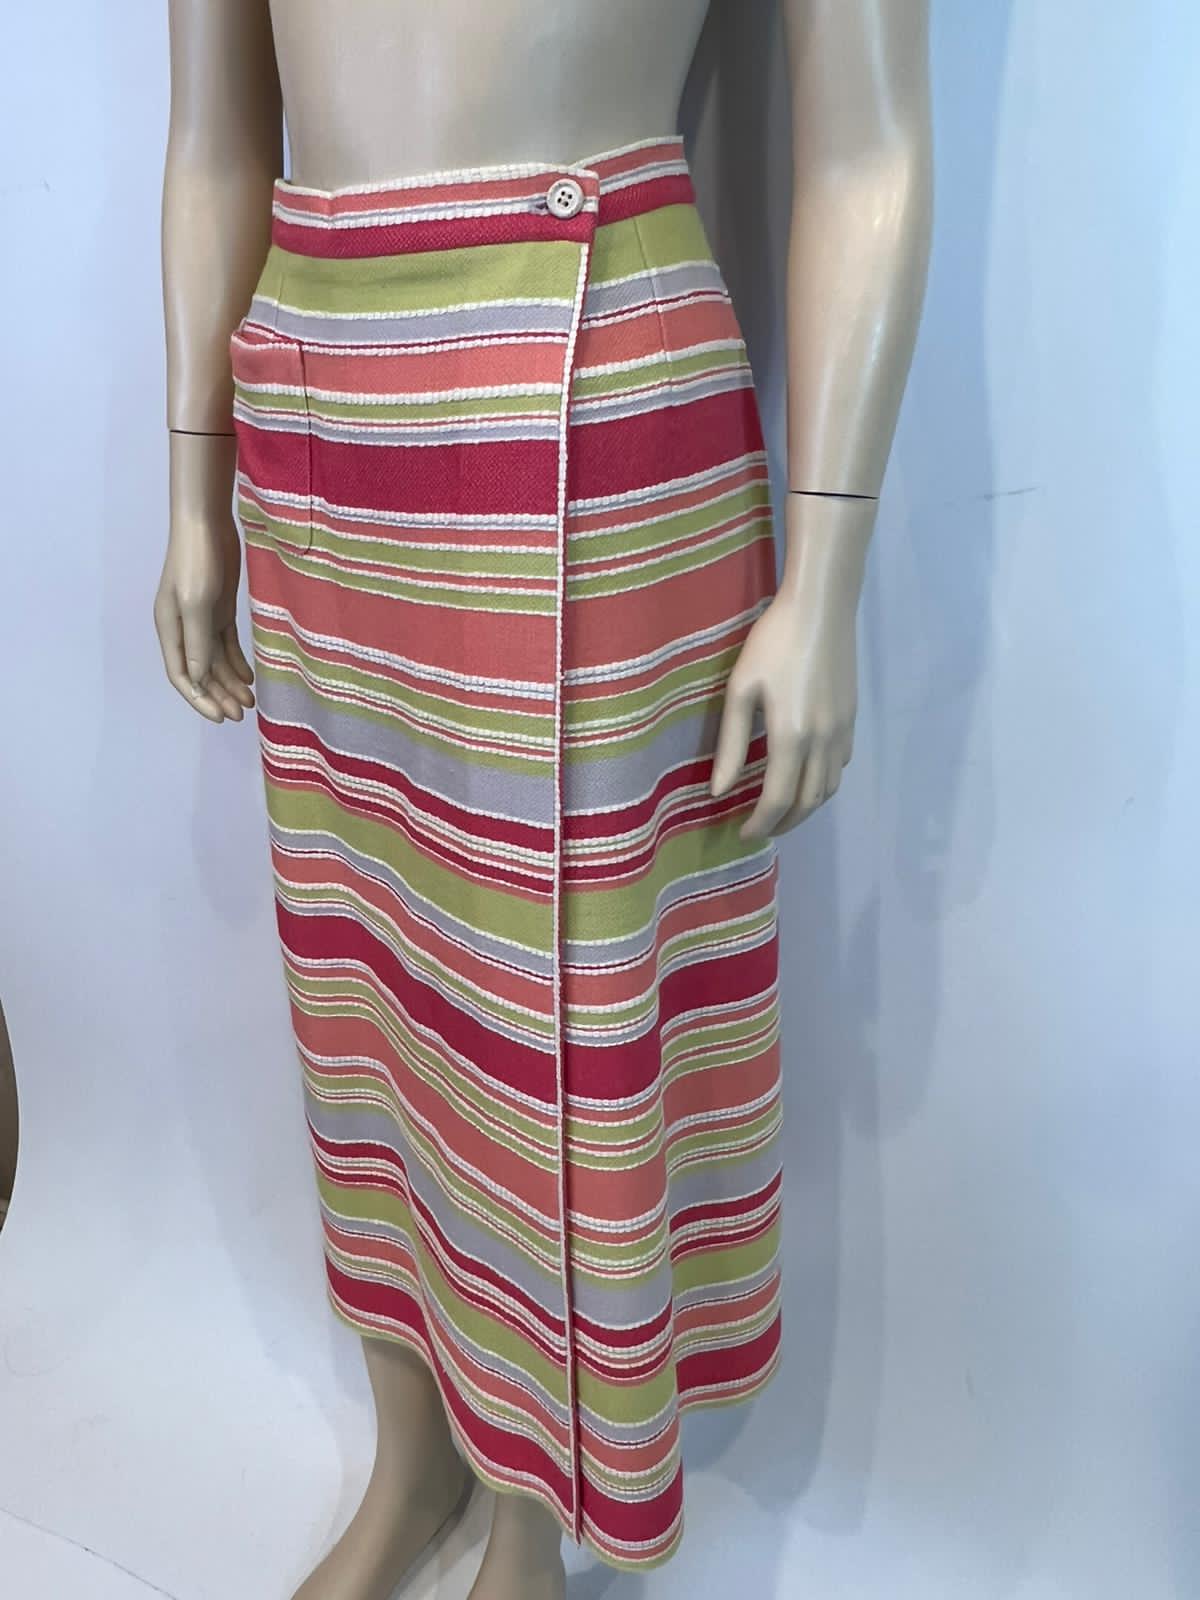 Chanel Multicolor Printed Cotton Pleated Maxi Skirt S Chanel